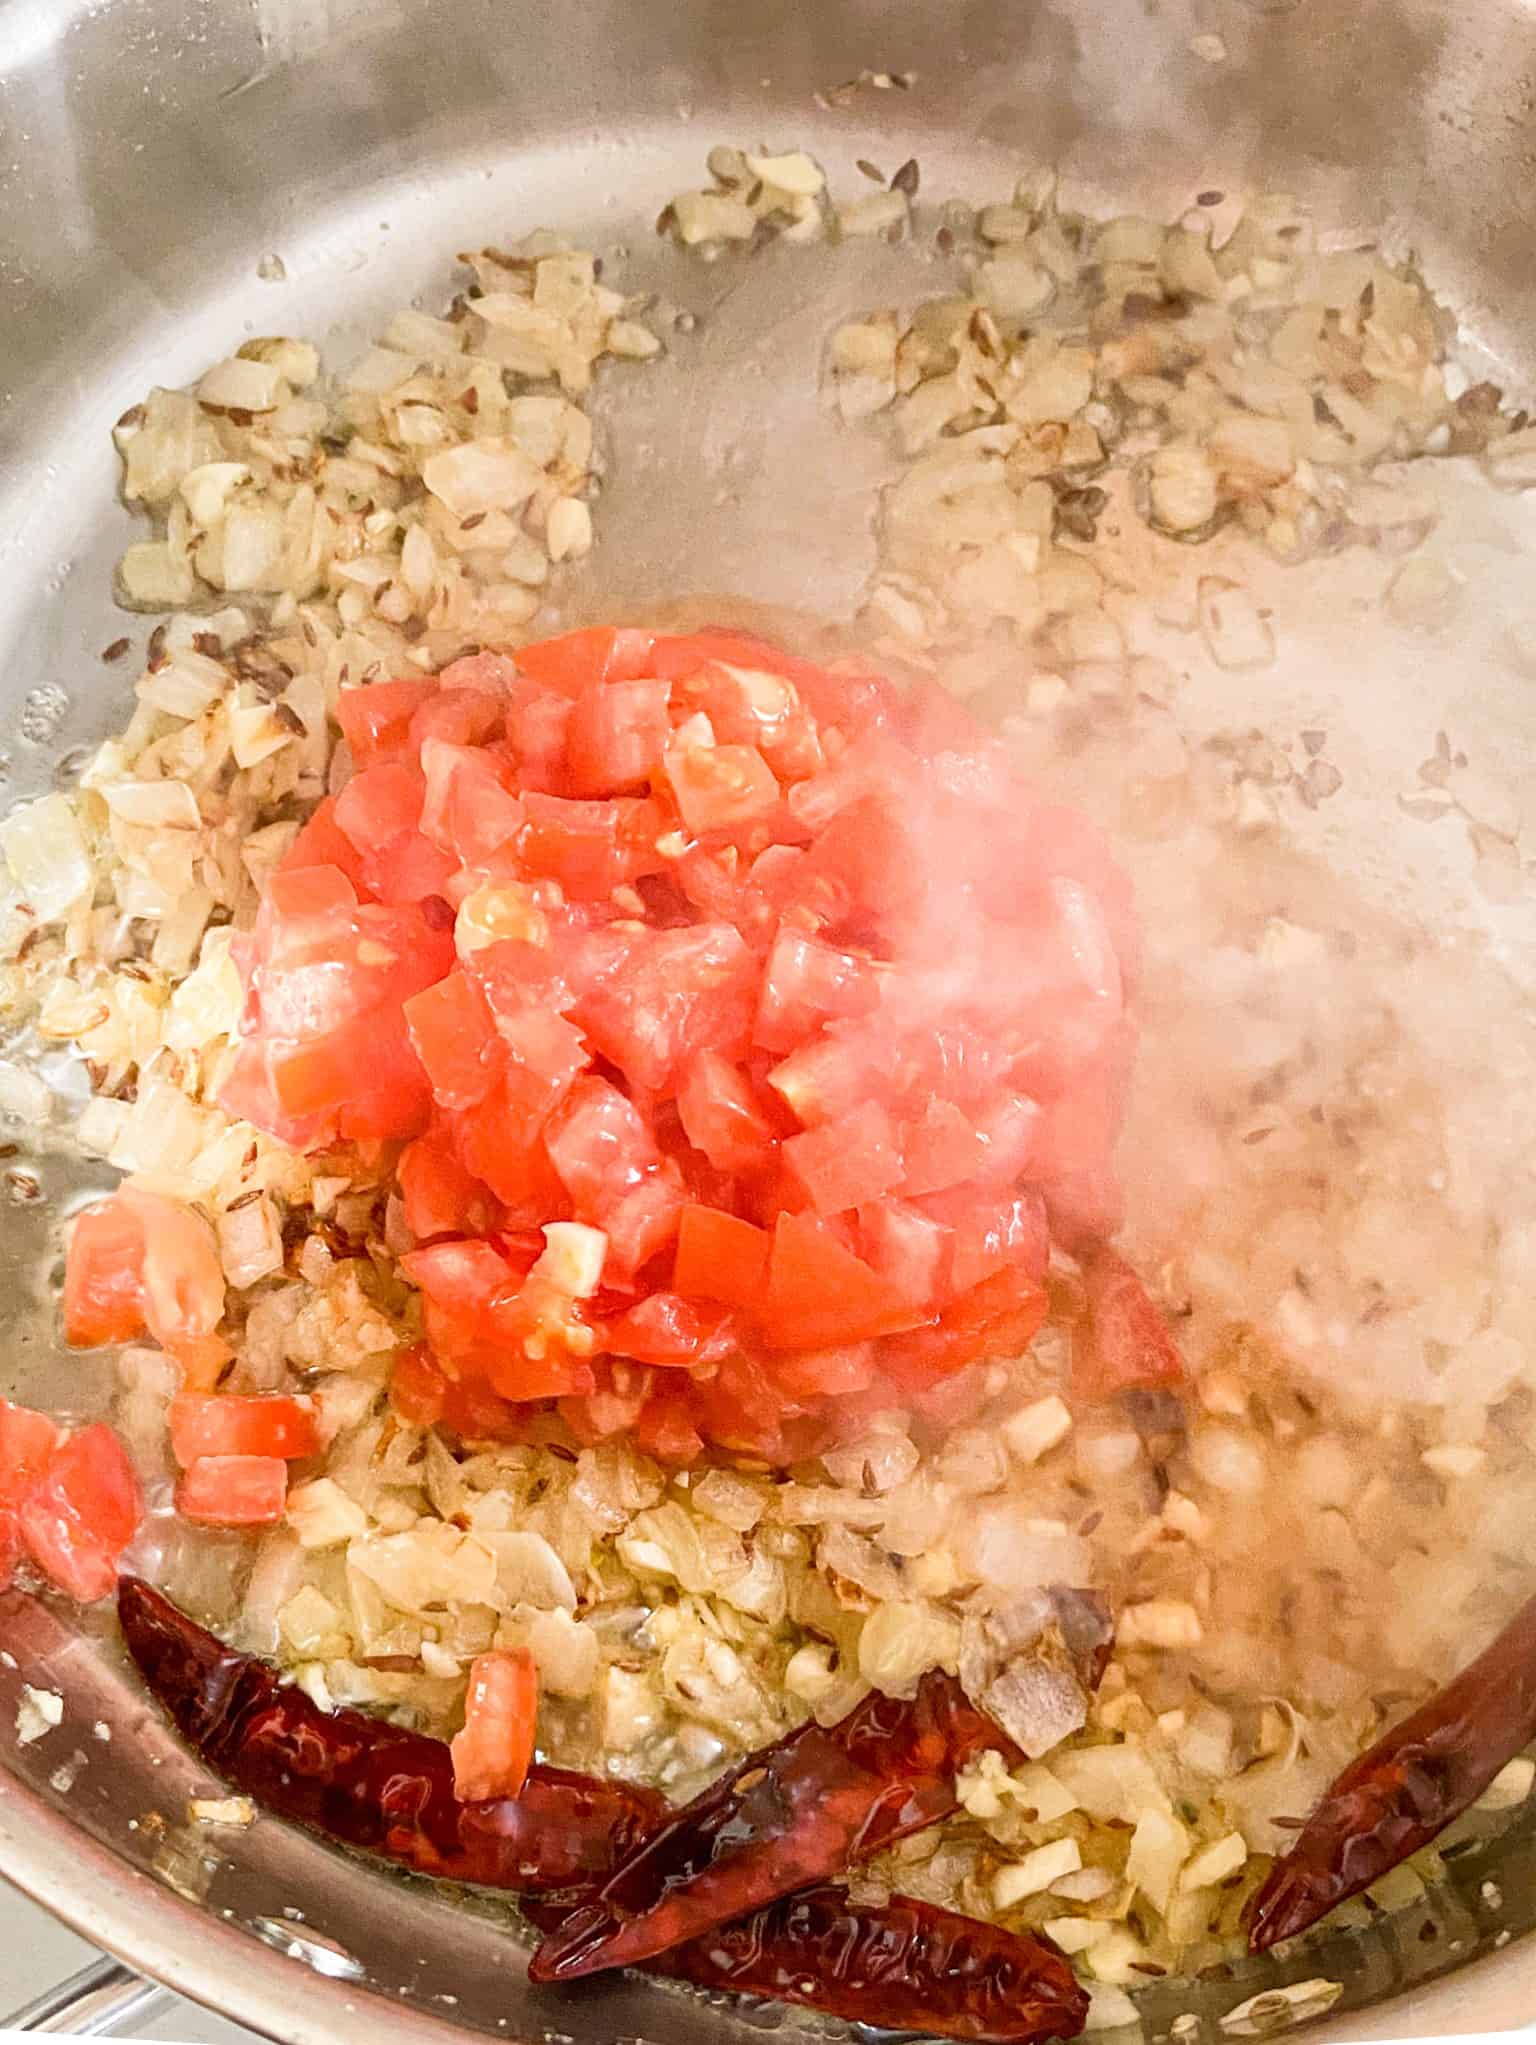 add diced tomatoes once the ginger and garlic is cooked.